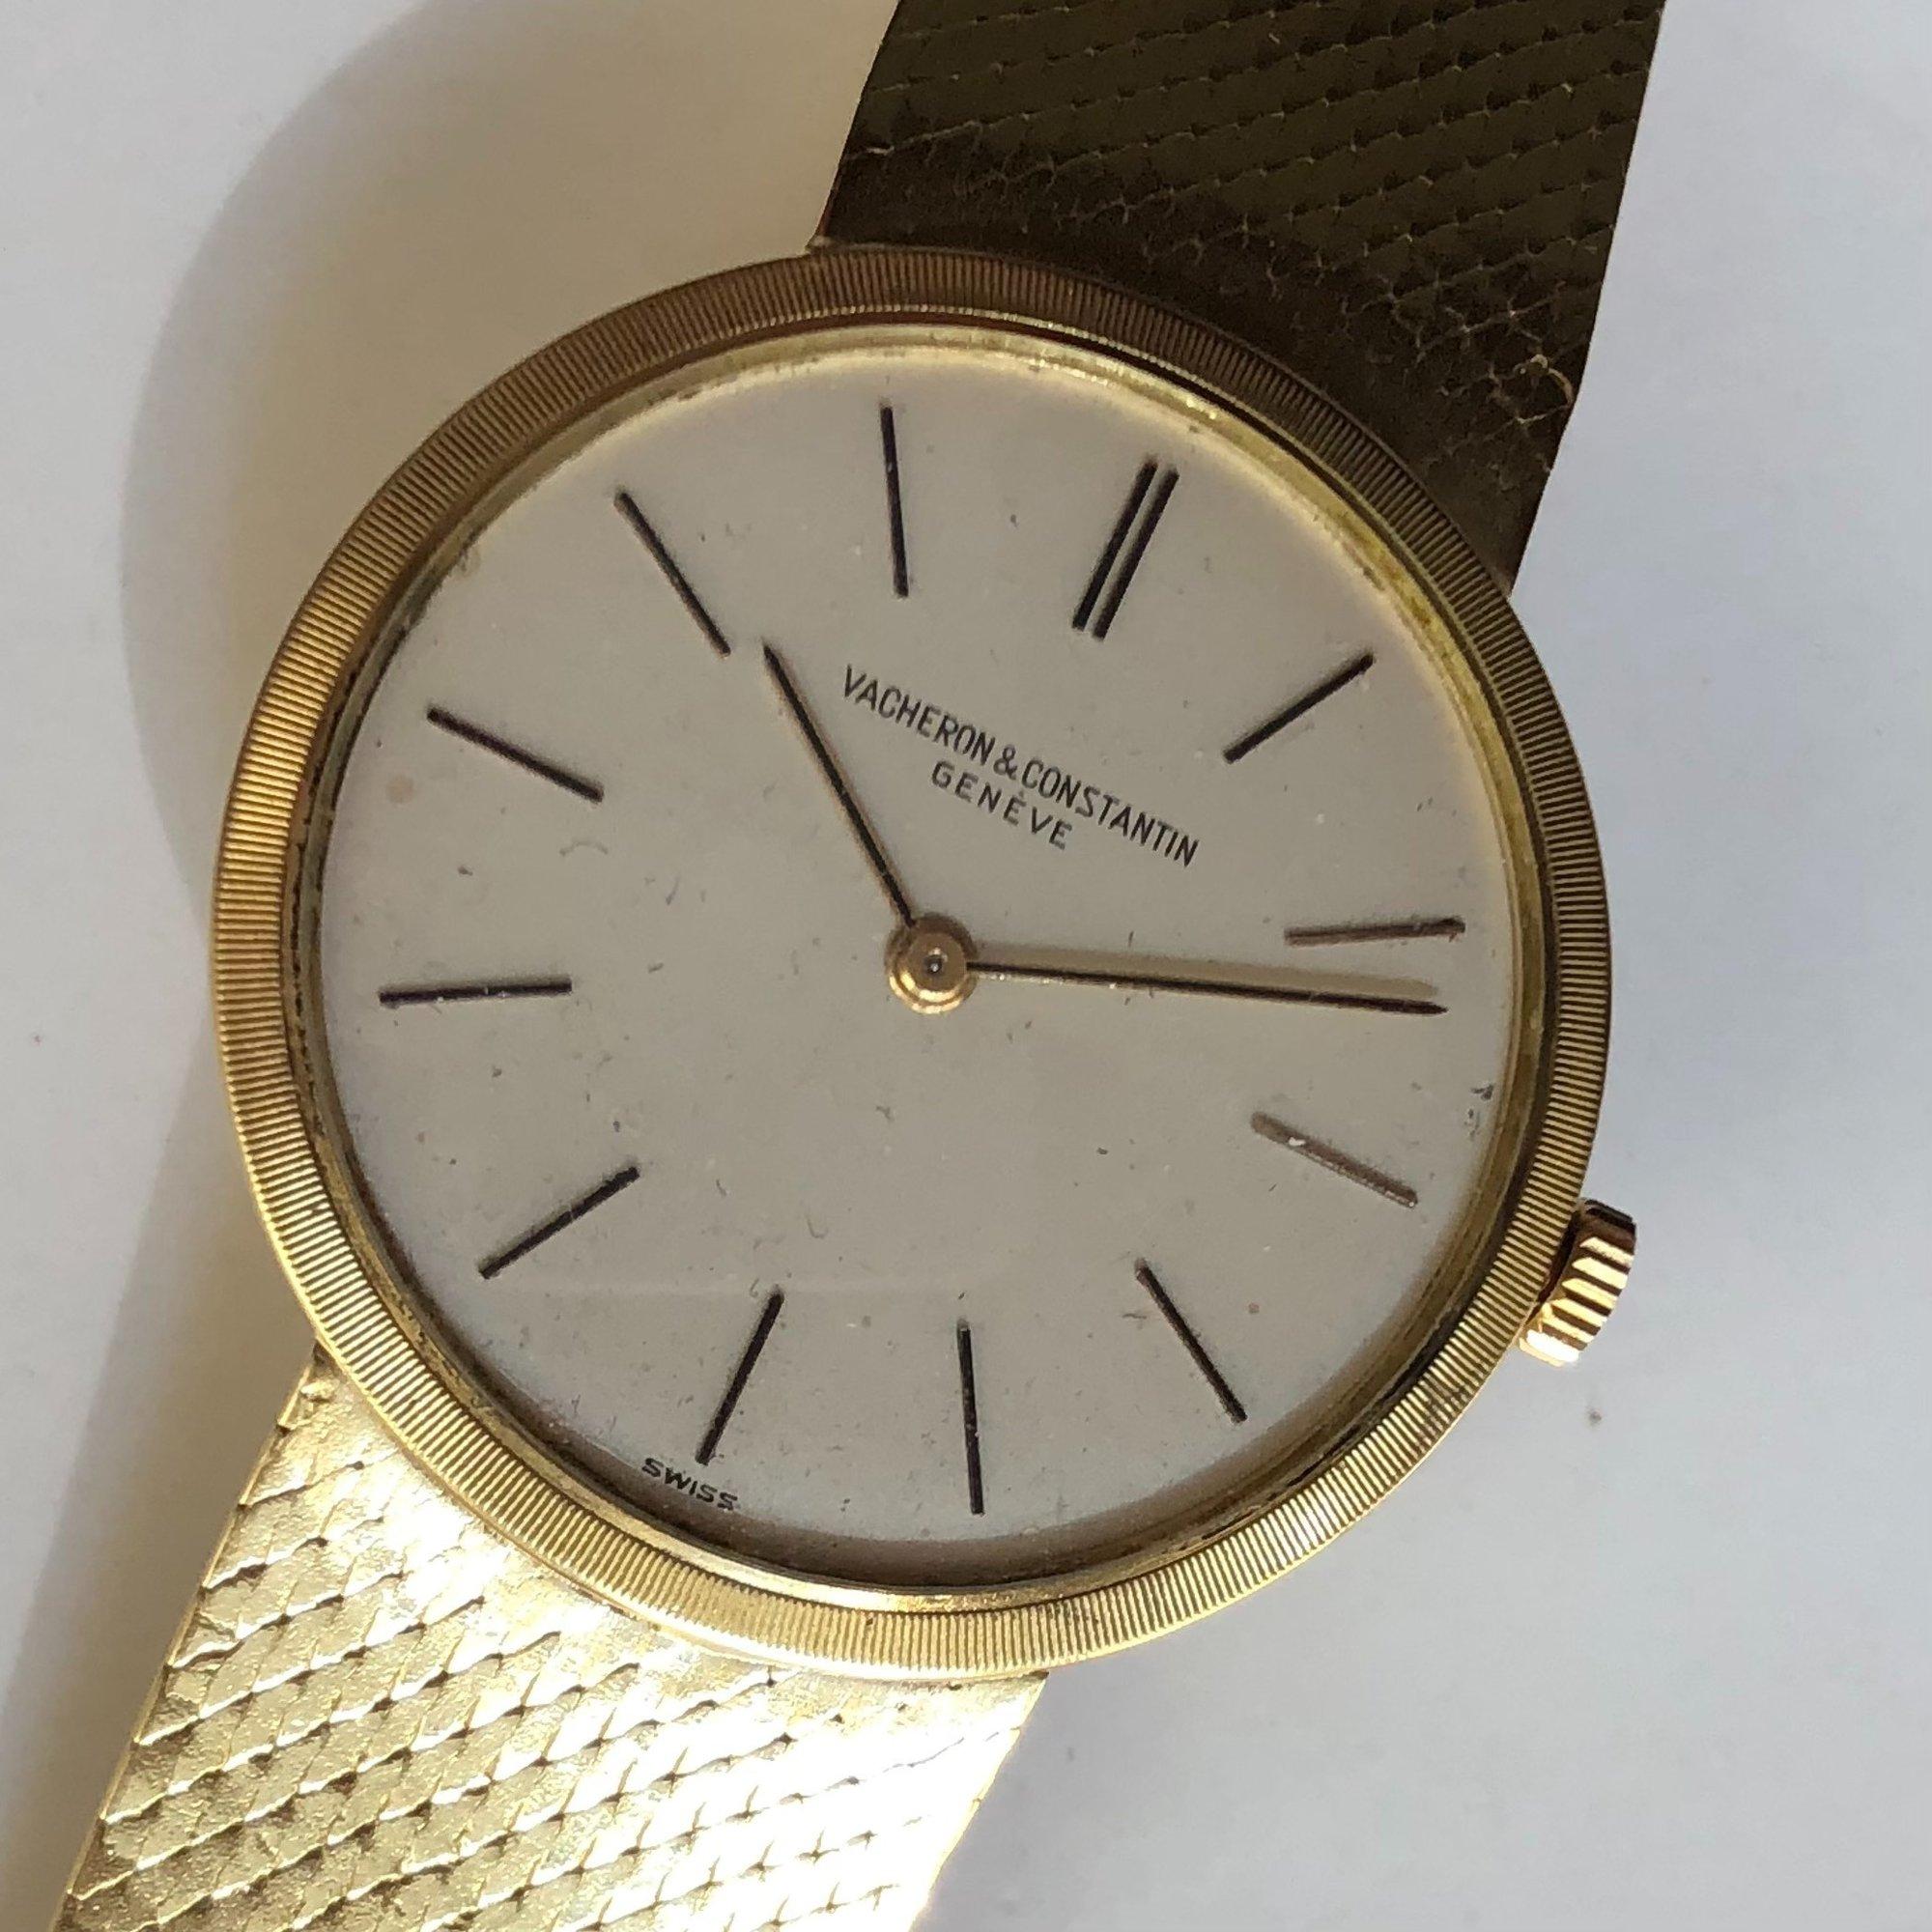 Vacheron Constantin Ultra Flat watch 1970, Yellow Gold 18k case, bracelet and clasp. Full Original. 
Caseback signed Vacheron Constantin Swiss 18K and 750 goldmark
Serial number 426039 and 6351
Length: 19cm Weight: 64g of which 56g estimated gold.